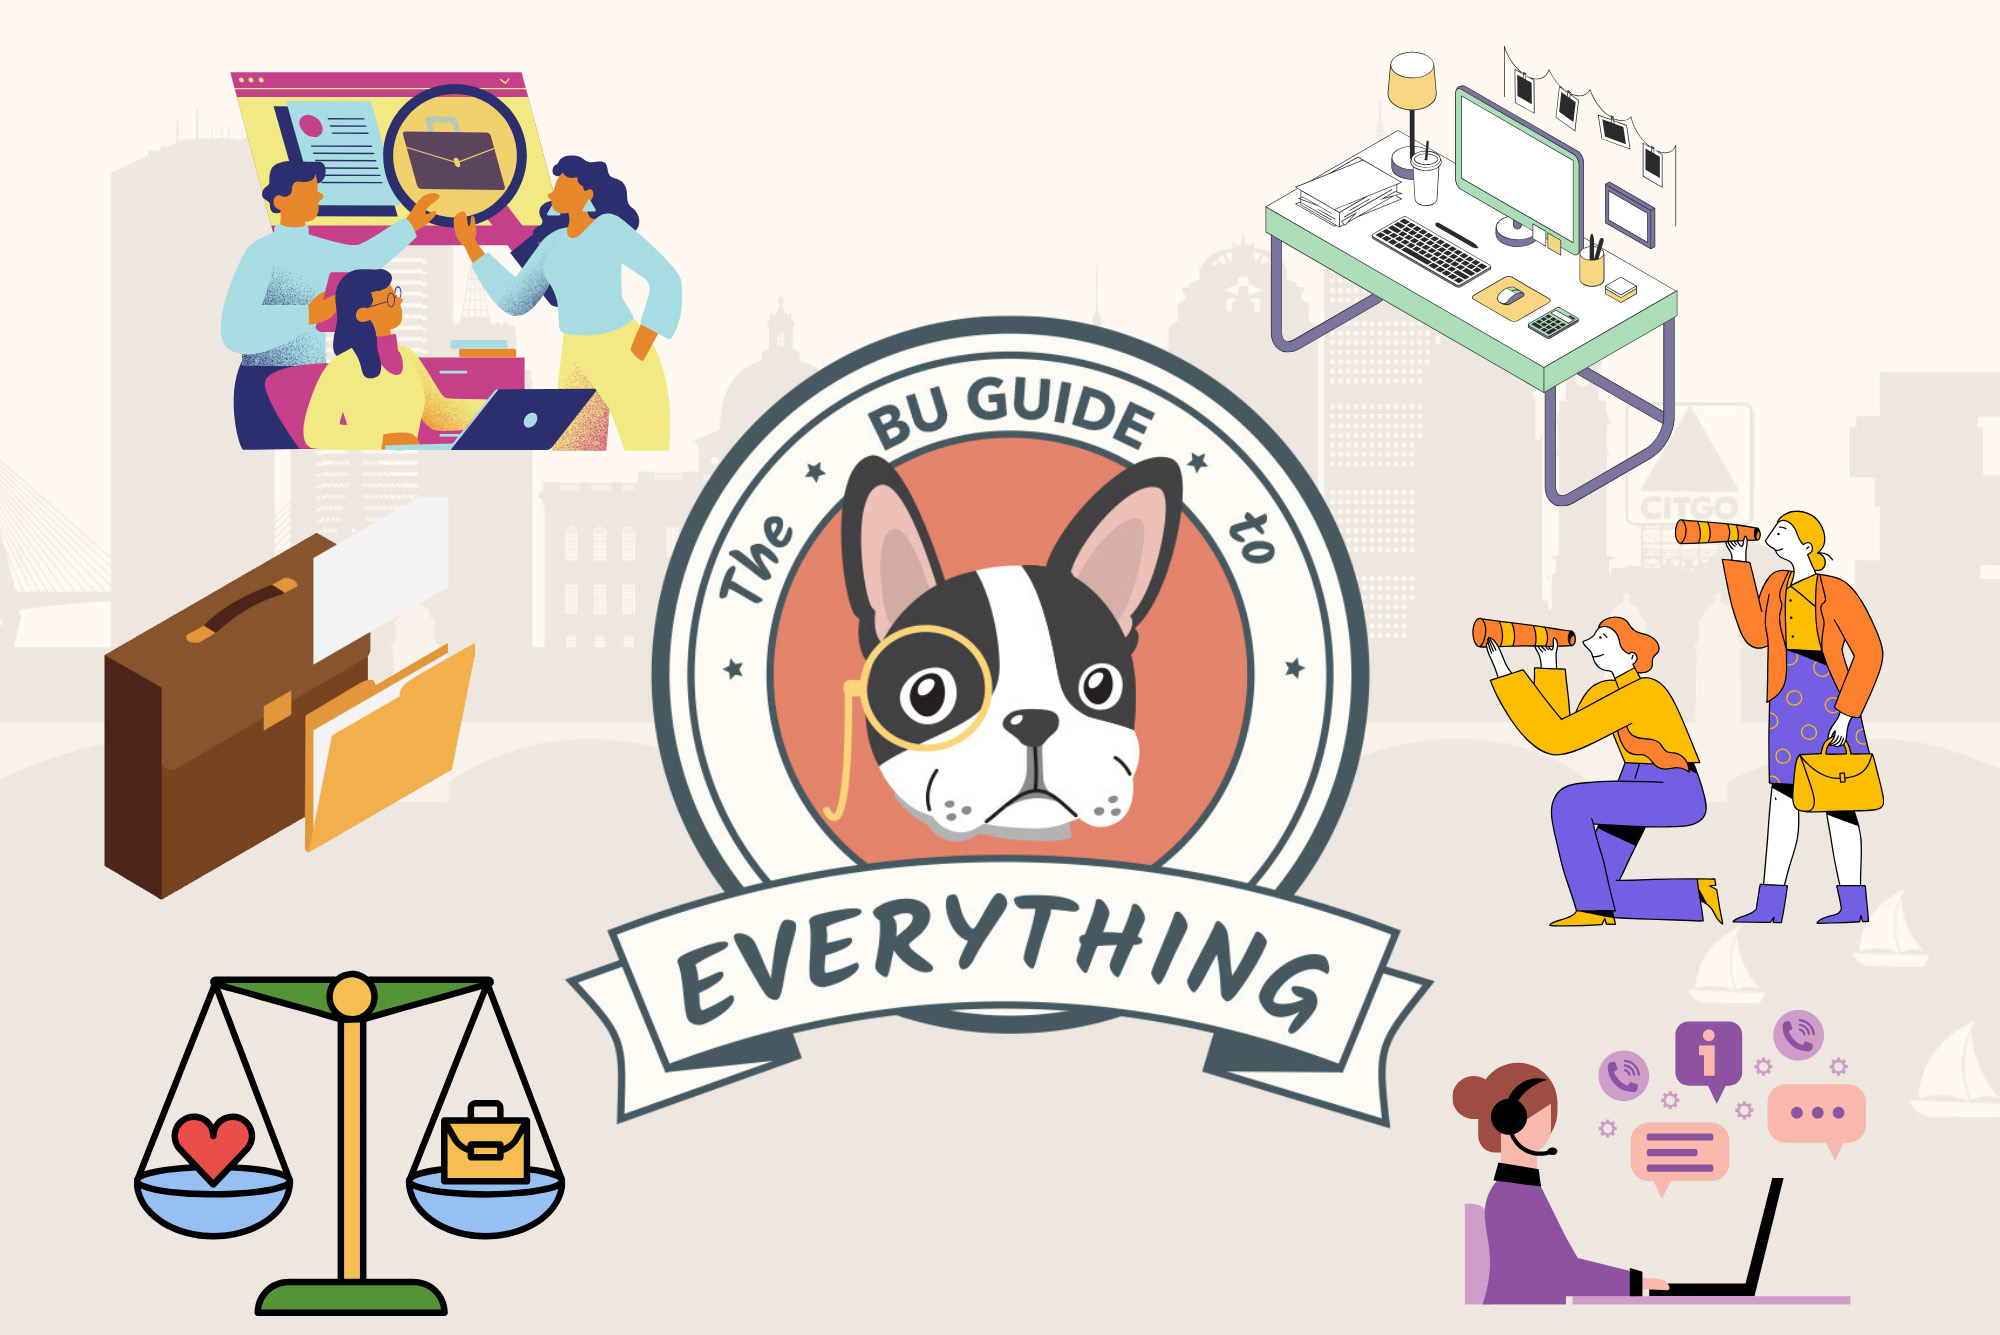 Illustration of a boston terrier in the middle of a circle of text reading "The BU Guide To Everything". There are vector images of people working at desks in an office environment surrounding the dog